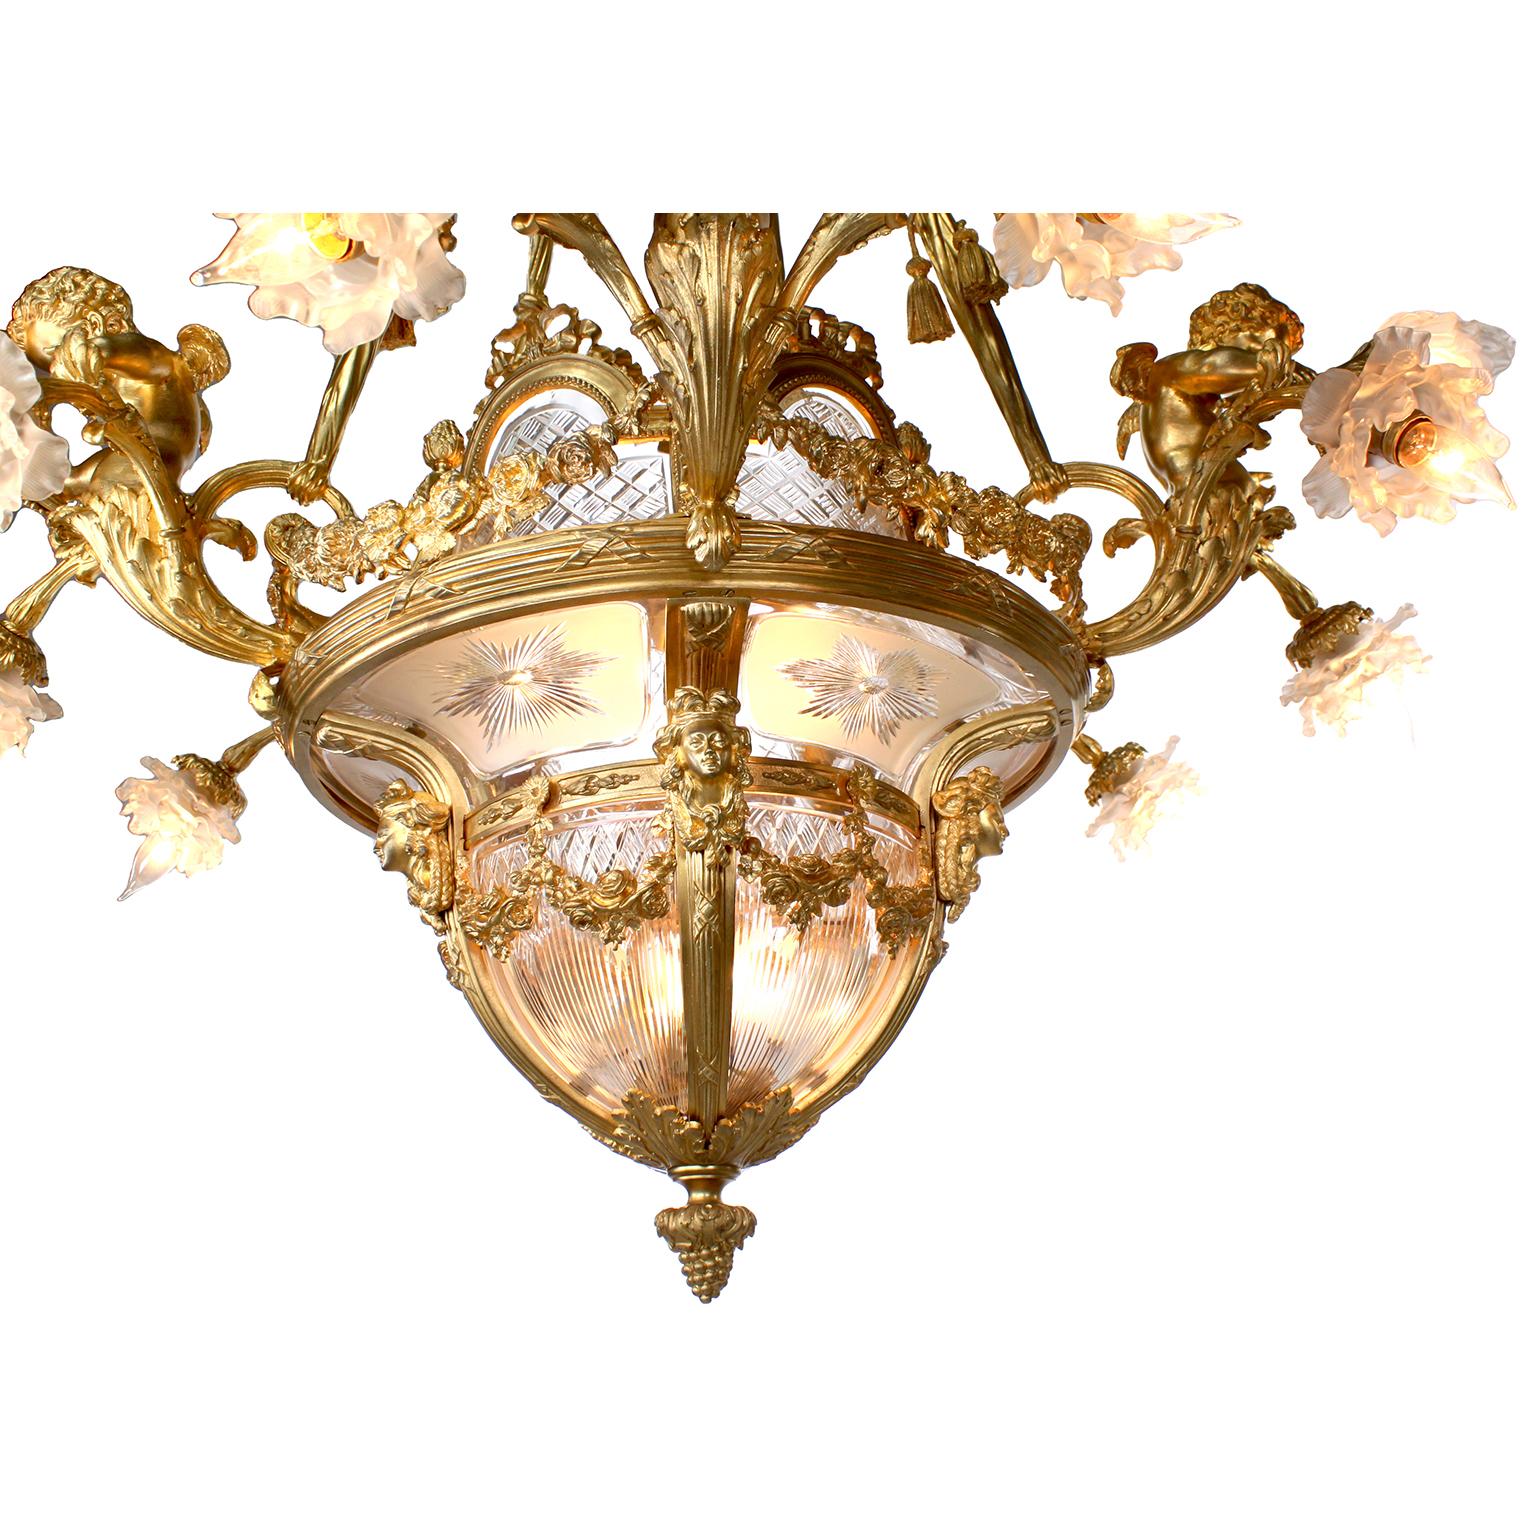 Belle Époque Fine French 19th-20th Century Louis XV Style Gilt Bronze and Baccarat Chandelier For Sale